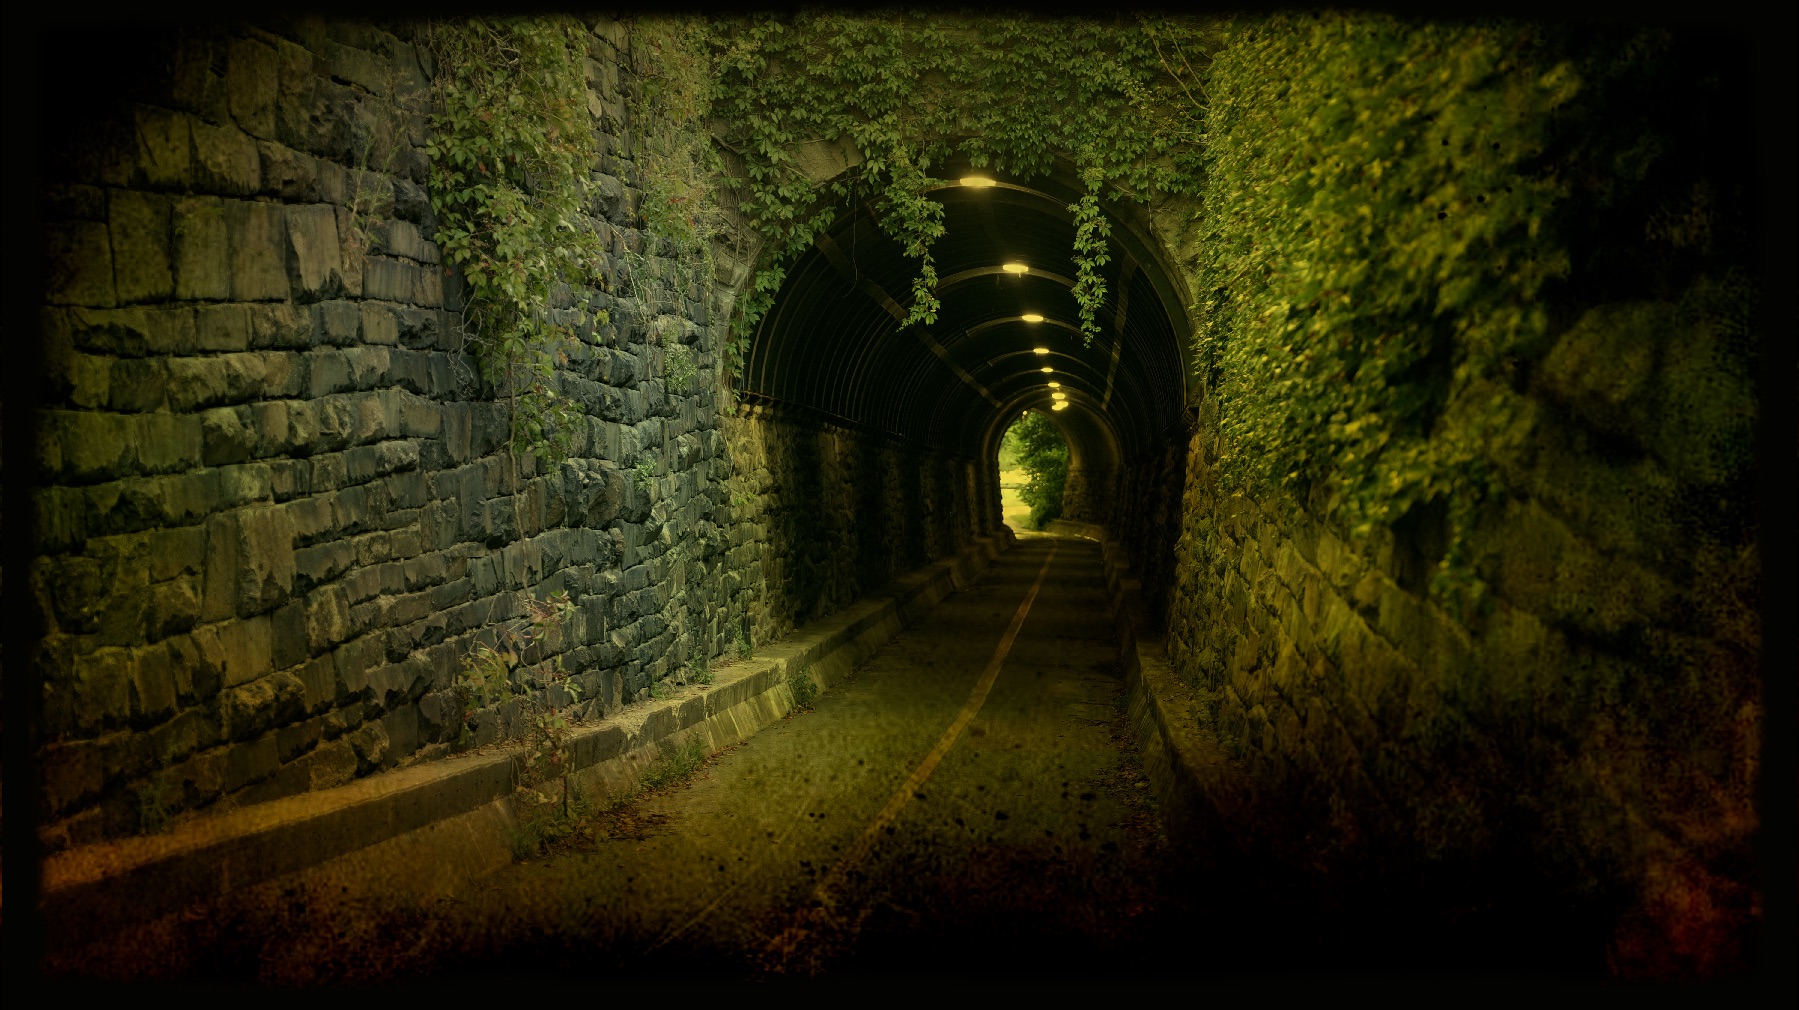 Wilkes Tunnel